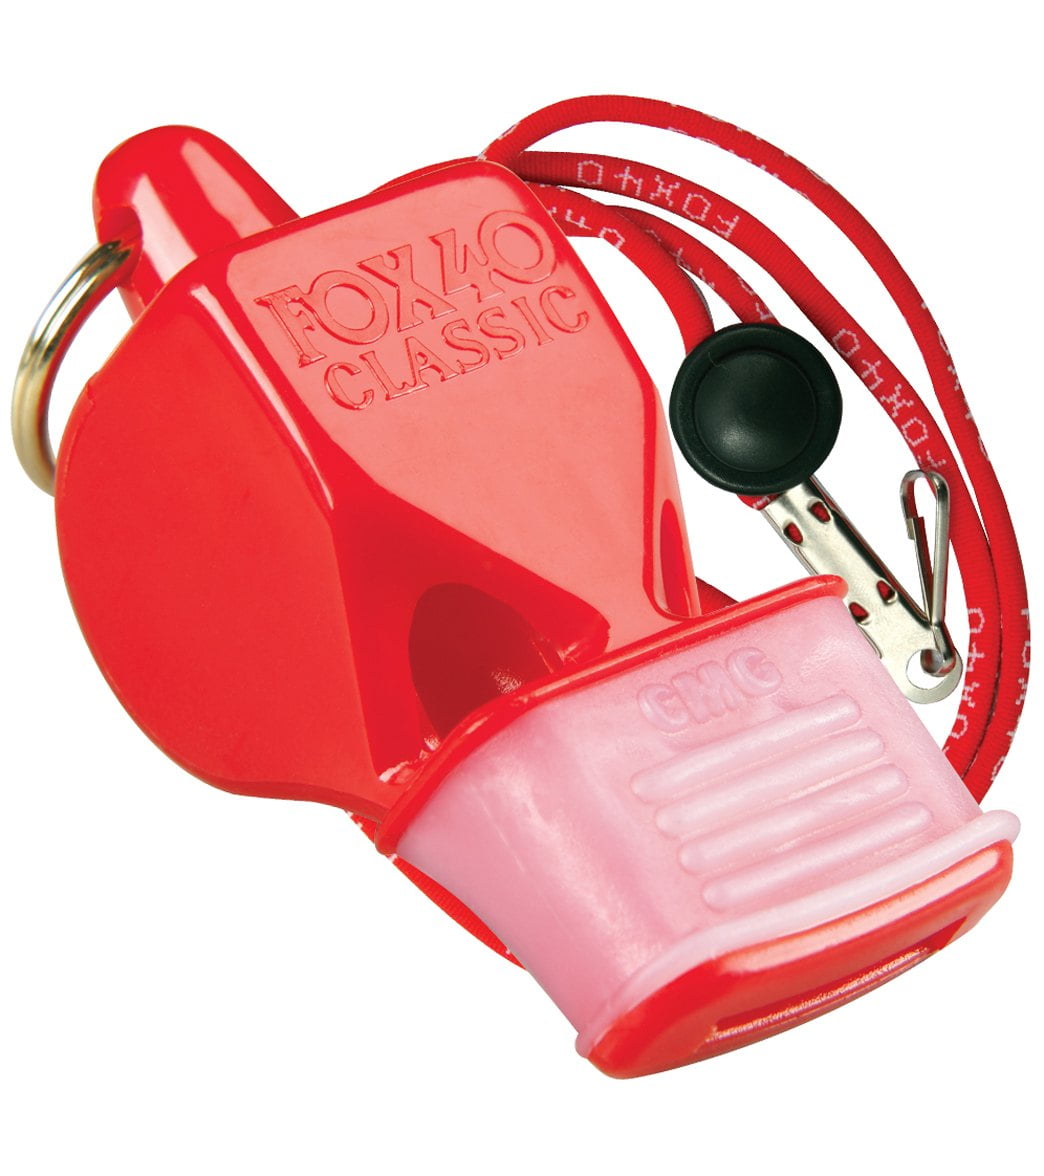 FOX 40 BRAND CLASSIC CMG OFFICIAL WHISTLE WITH FREE LANYARD